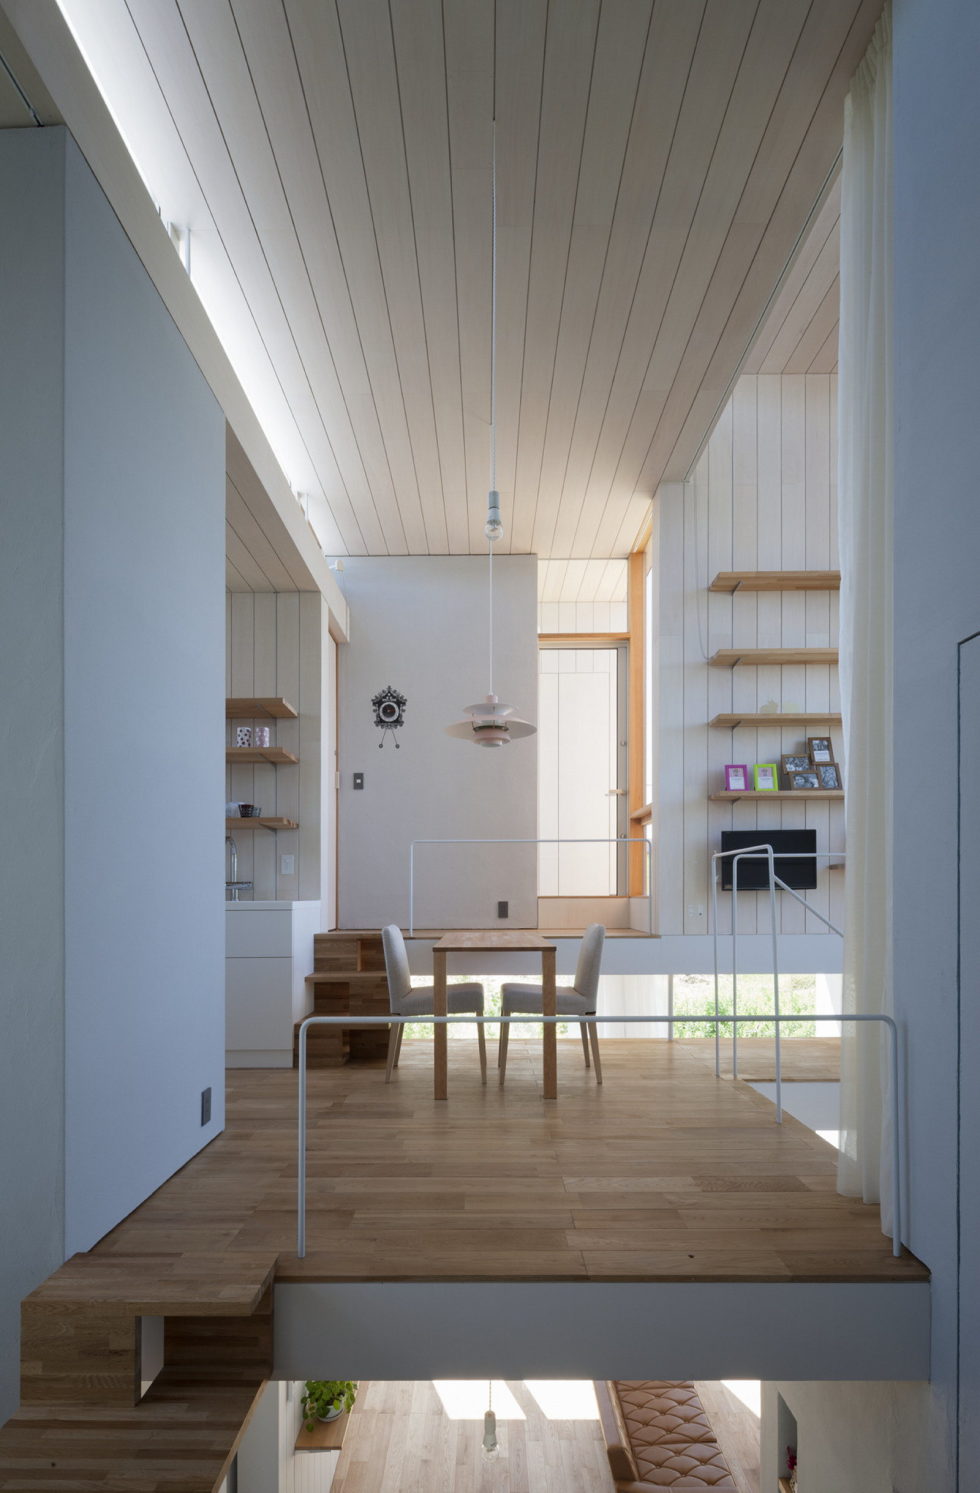 The family idyll in Japan from the Ihrmk studio 9